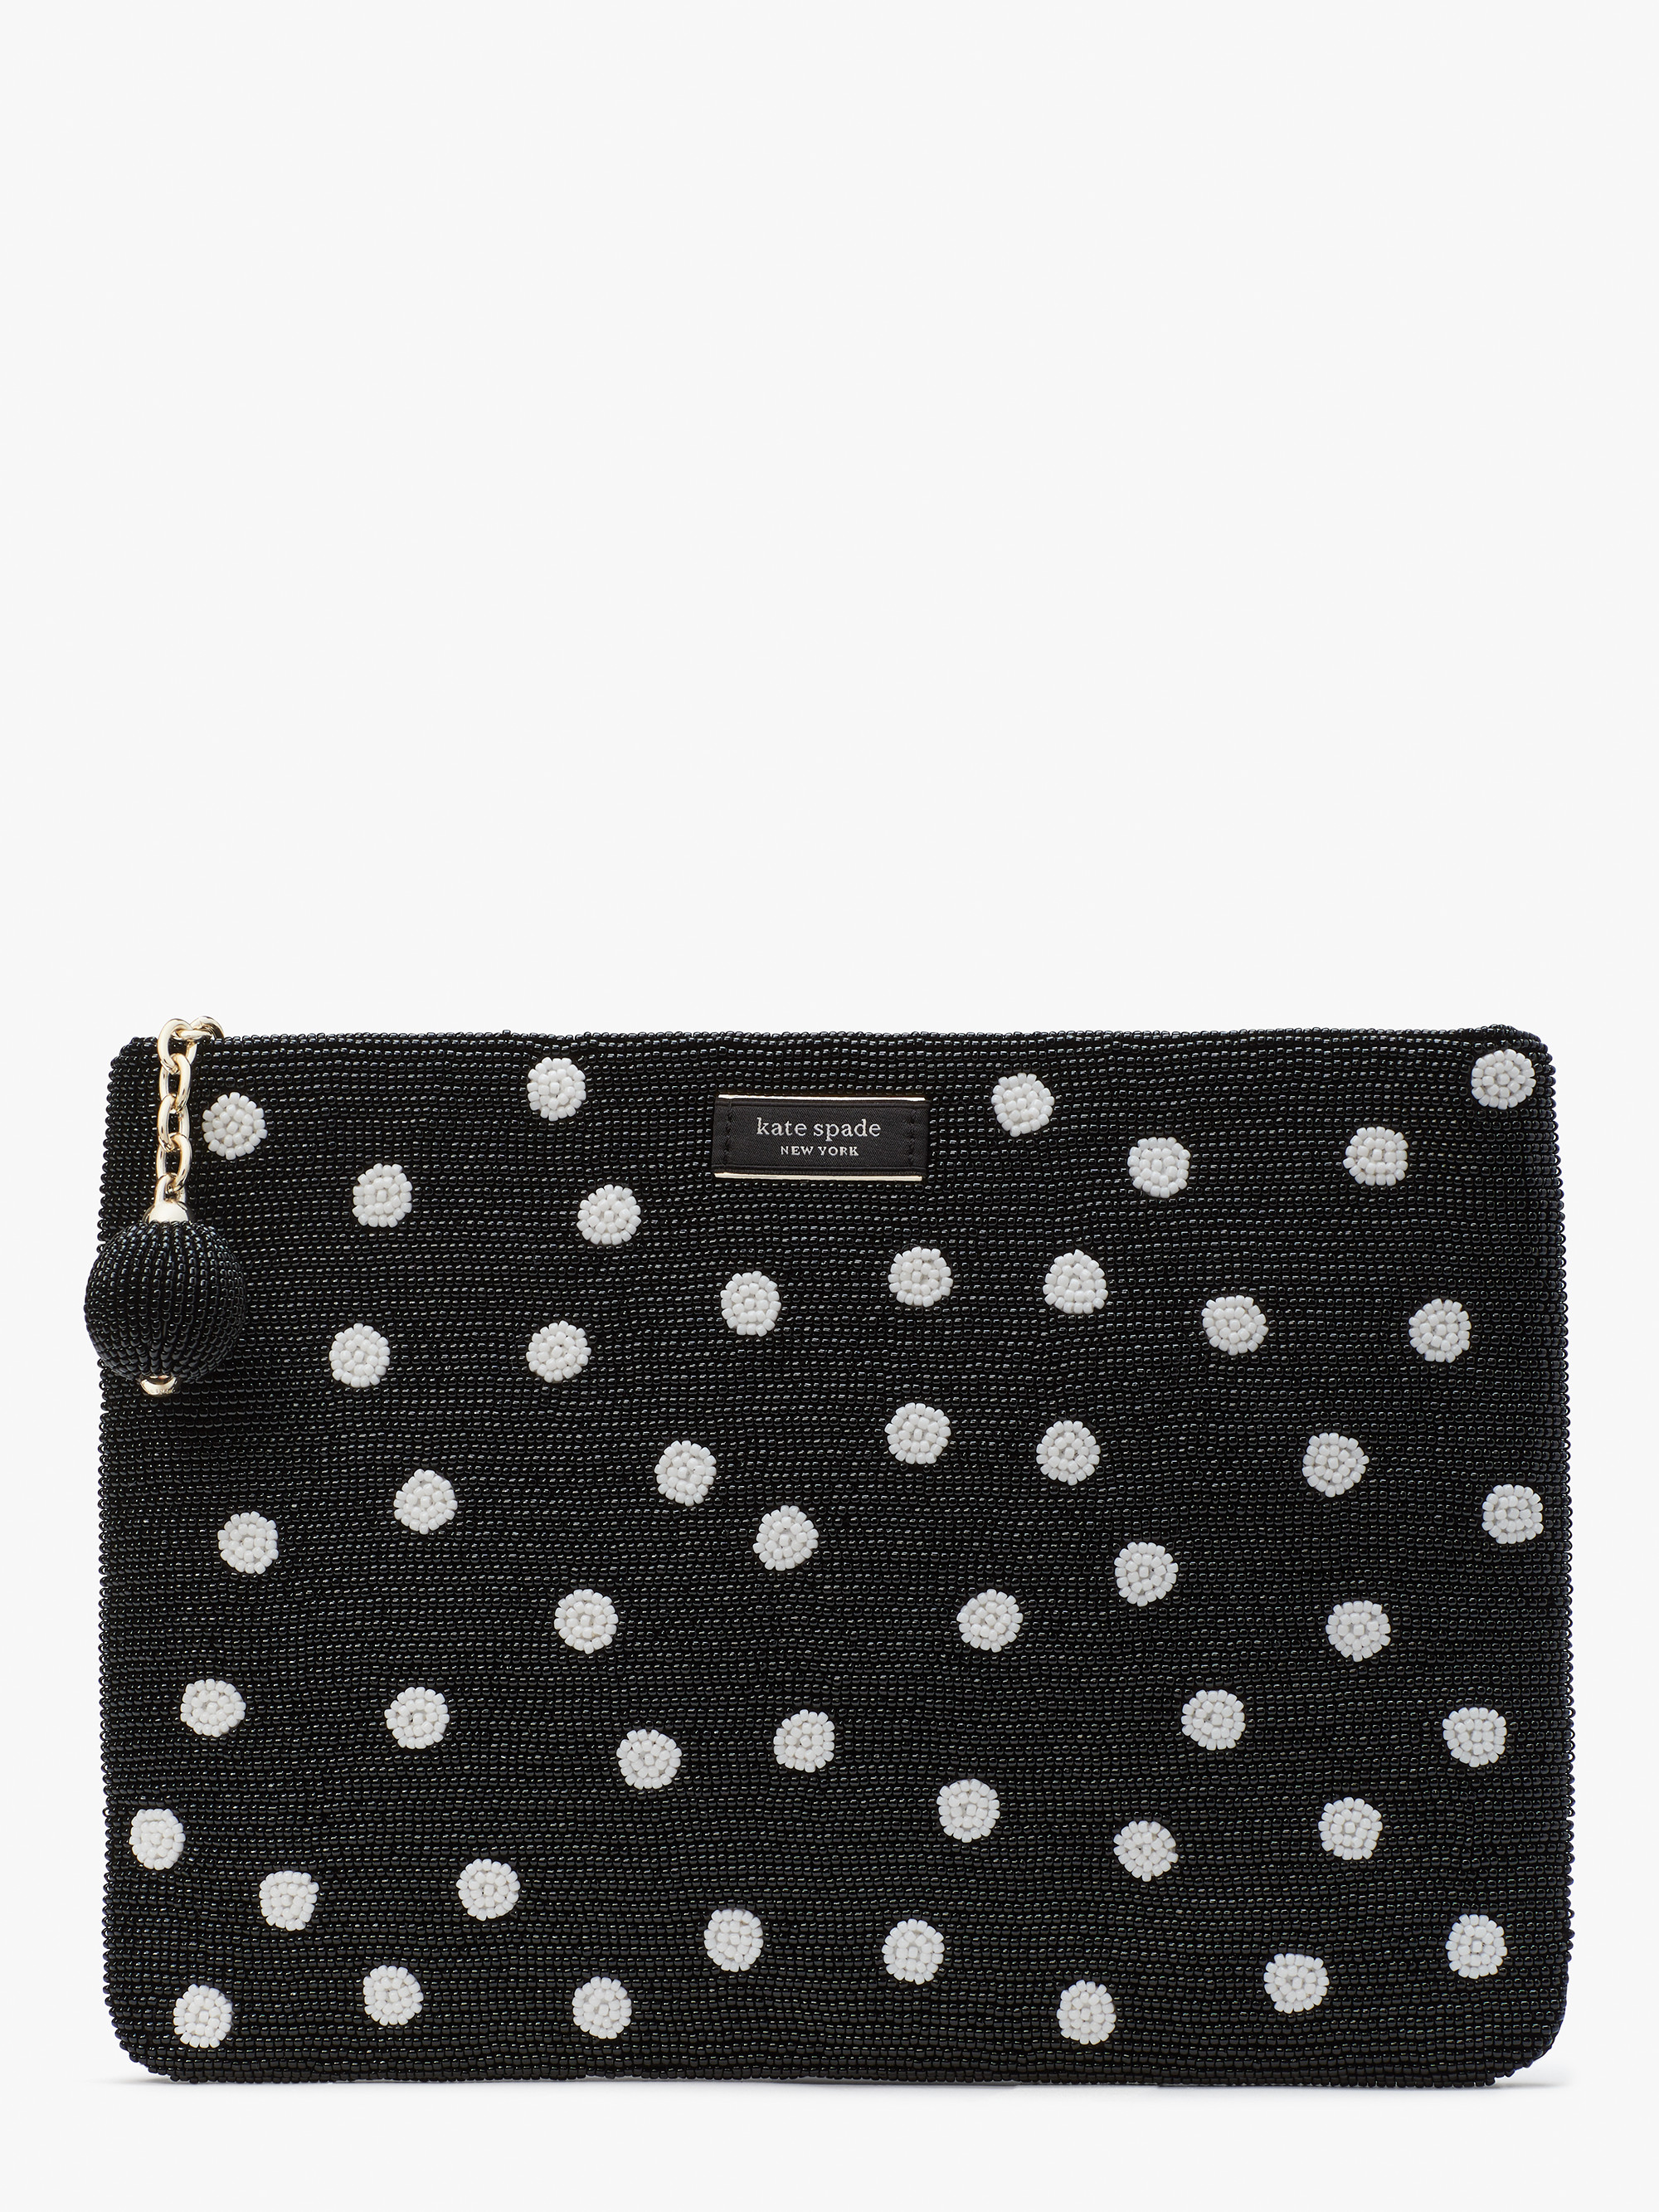 Kate Spade On Purpose Gia Large Pouch